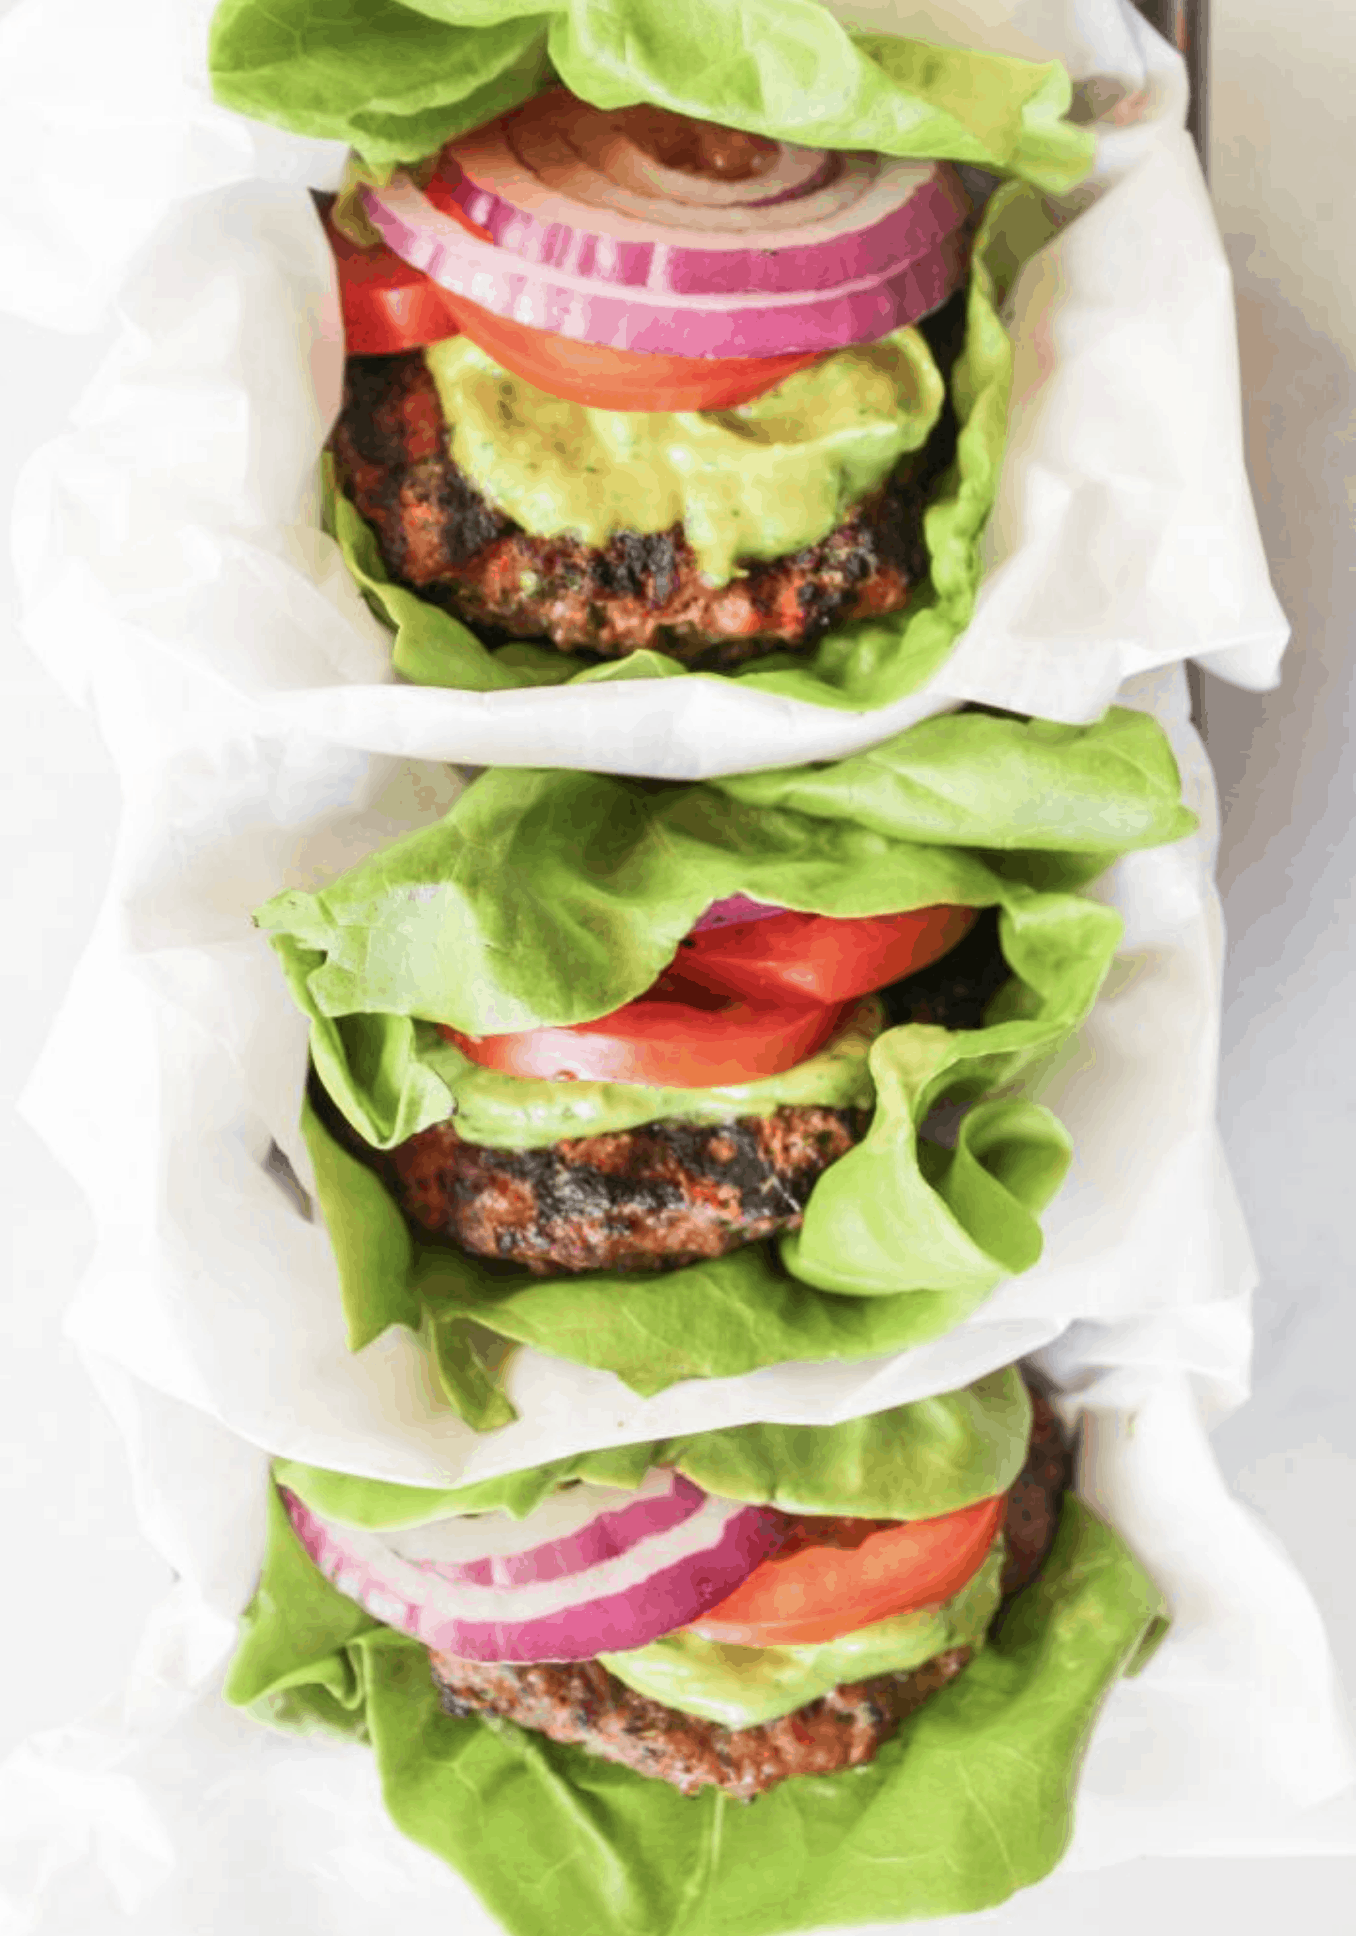 three types of burgers all wrapped in lettuce buns